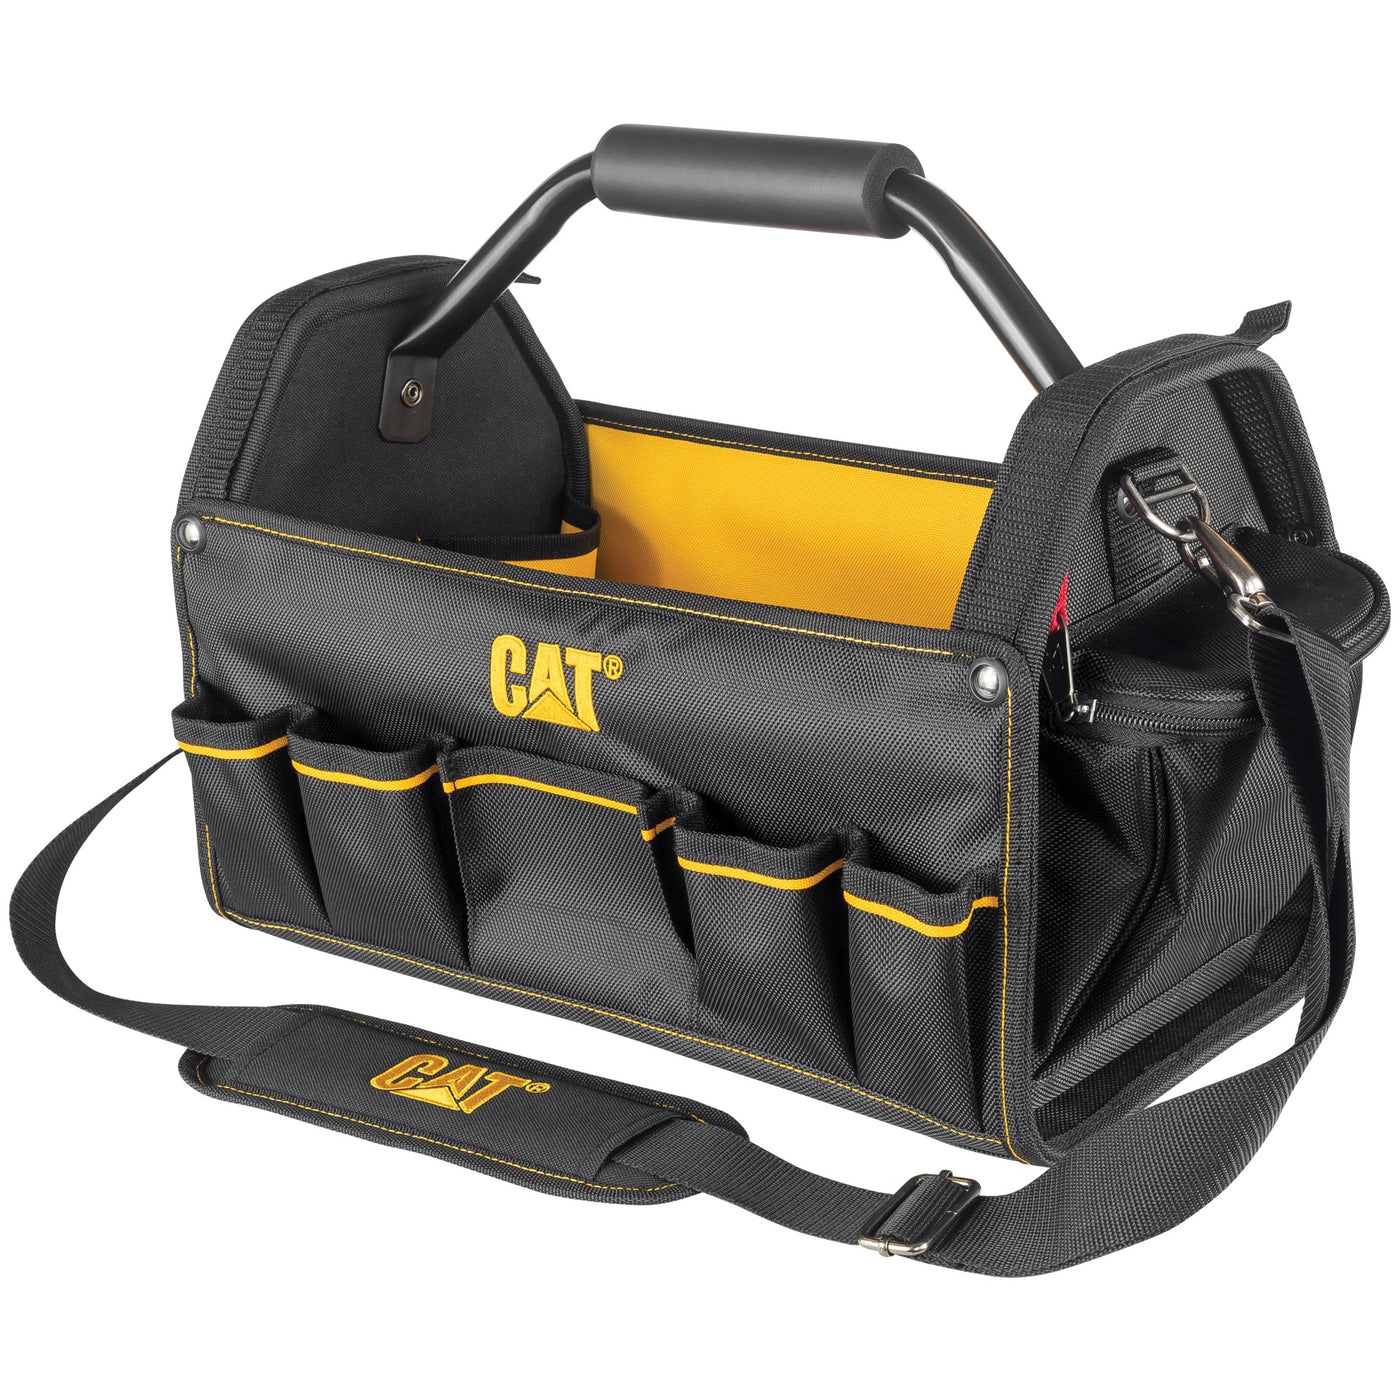 17 in. Pro Tool Tote